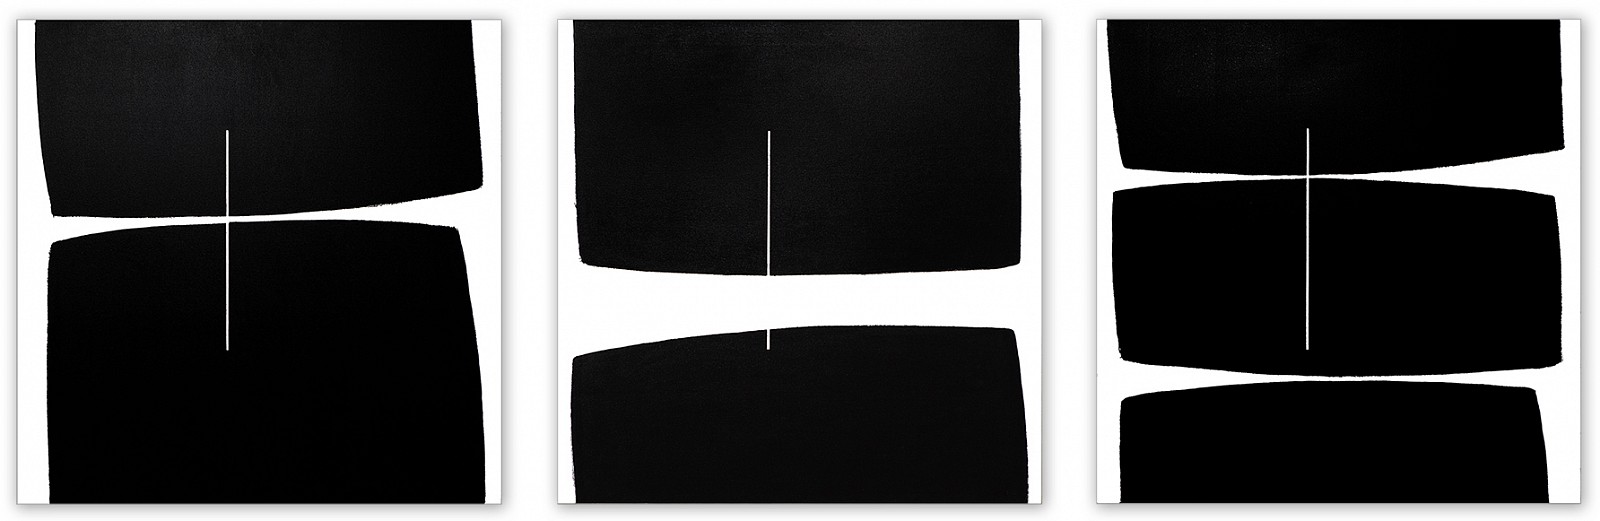 Tim Forbes, Trilogy 1-3 (triptych)
Acrylic on canvas, 40 x 120 in.
Greater the sum of the parts
.
As a single artist with a tinge of OCD I am married to patterns of certainty. Certain food, wine, shirts. Certain paint, canvas and formats.

A delivery of 40 inch square canvases created uncertainty stirring a deniable urge to immediately paint a circle as the metaphoric basis of life.

Rather, a synopsis of Pattern Recognition in three vertically oriented works came to the fore as a Trilogy.
A single static line of identical height and geometric position on each work creates an addendum to the rhythm of the patterns and their depth of field, completing negative space as the beat goes on.